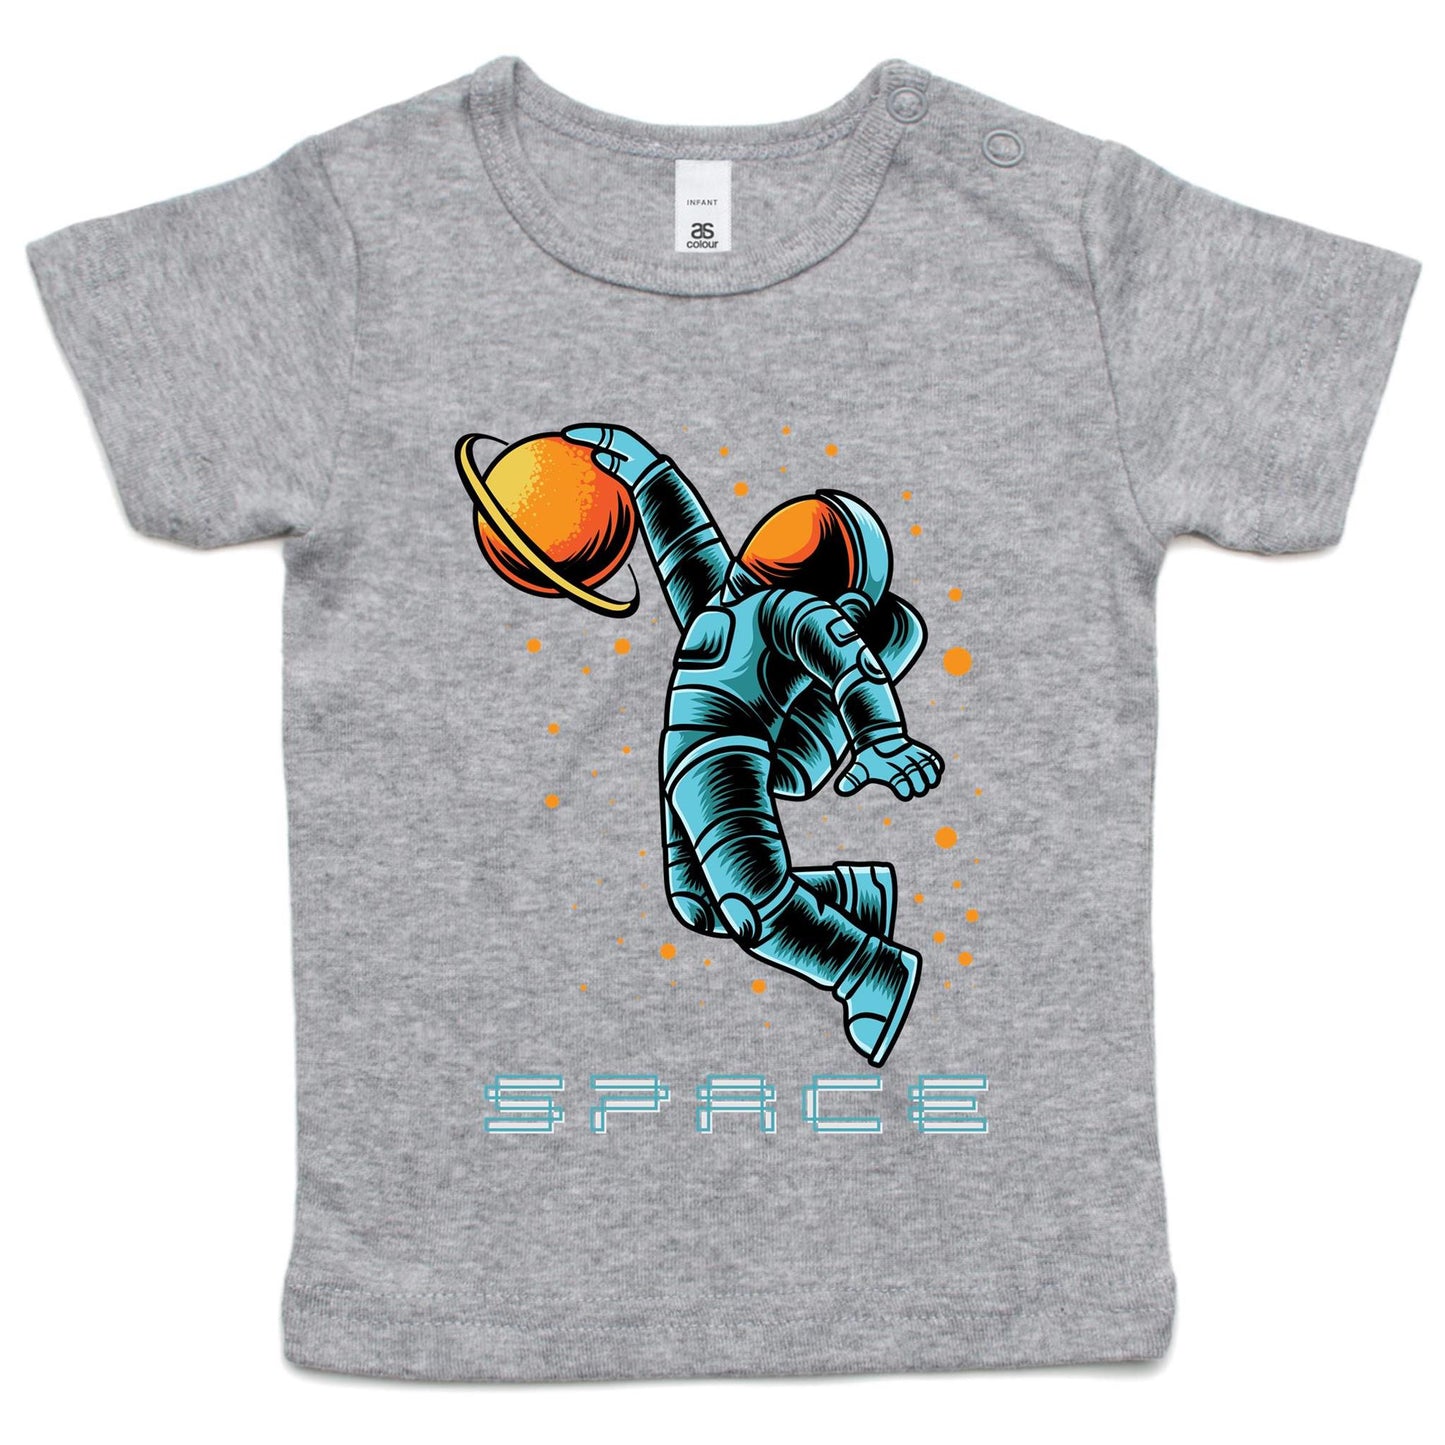 Astronaut Basketball - Baby T-shirt Grey Marle Space